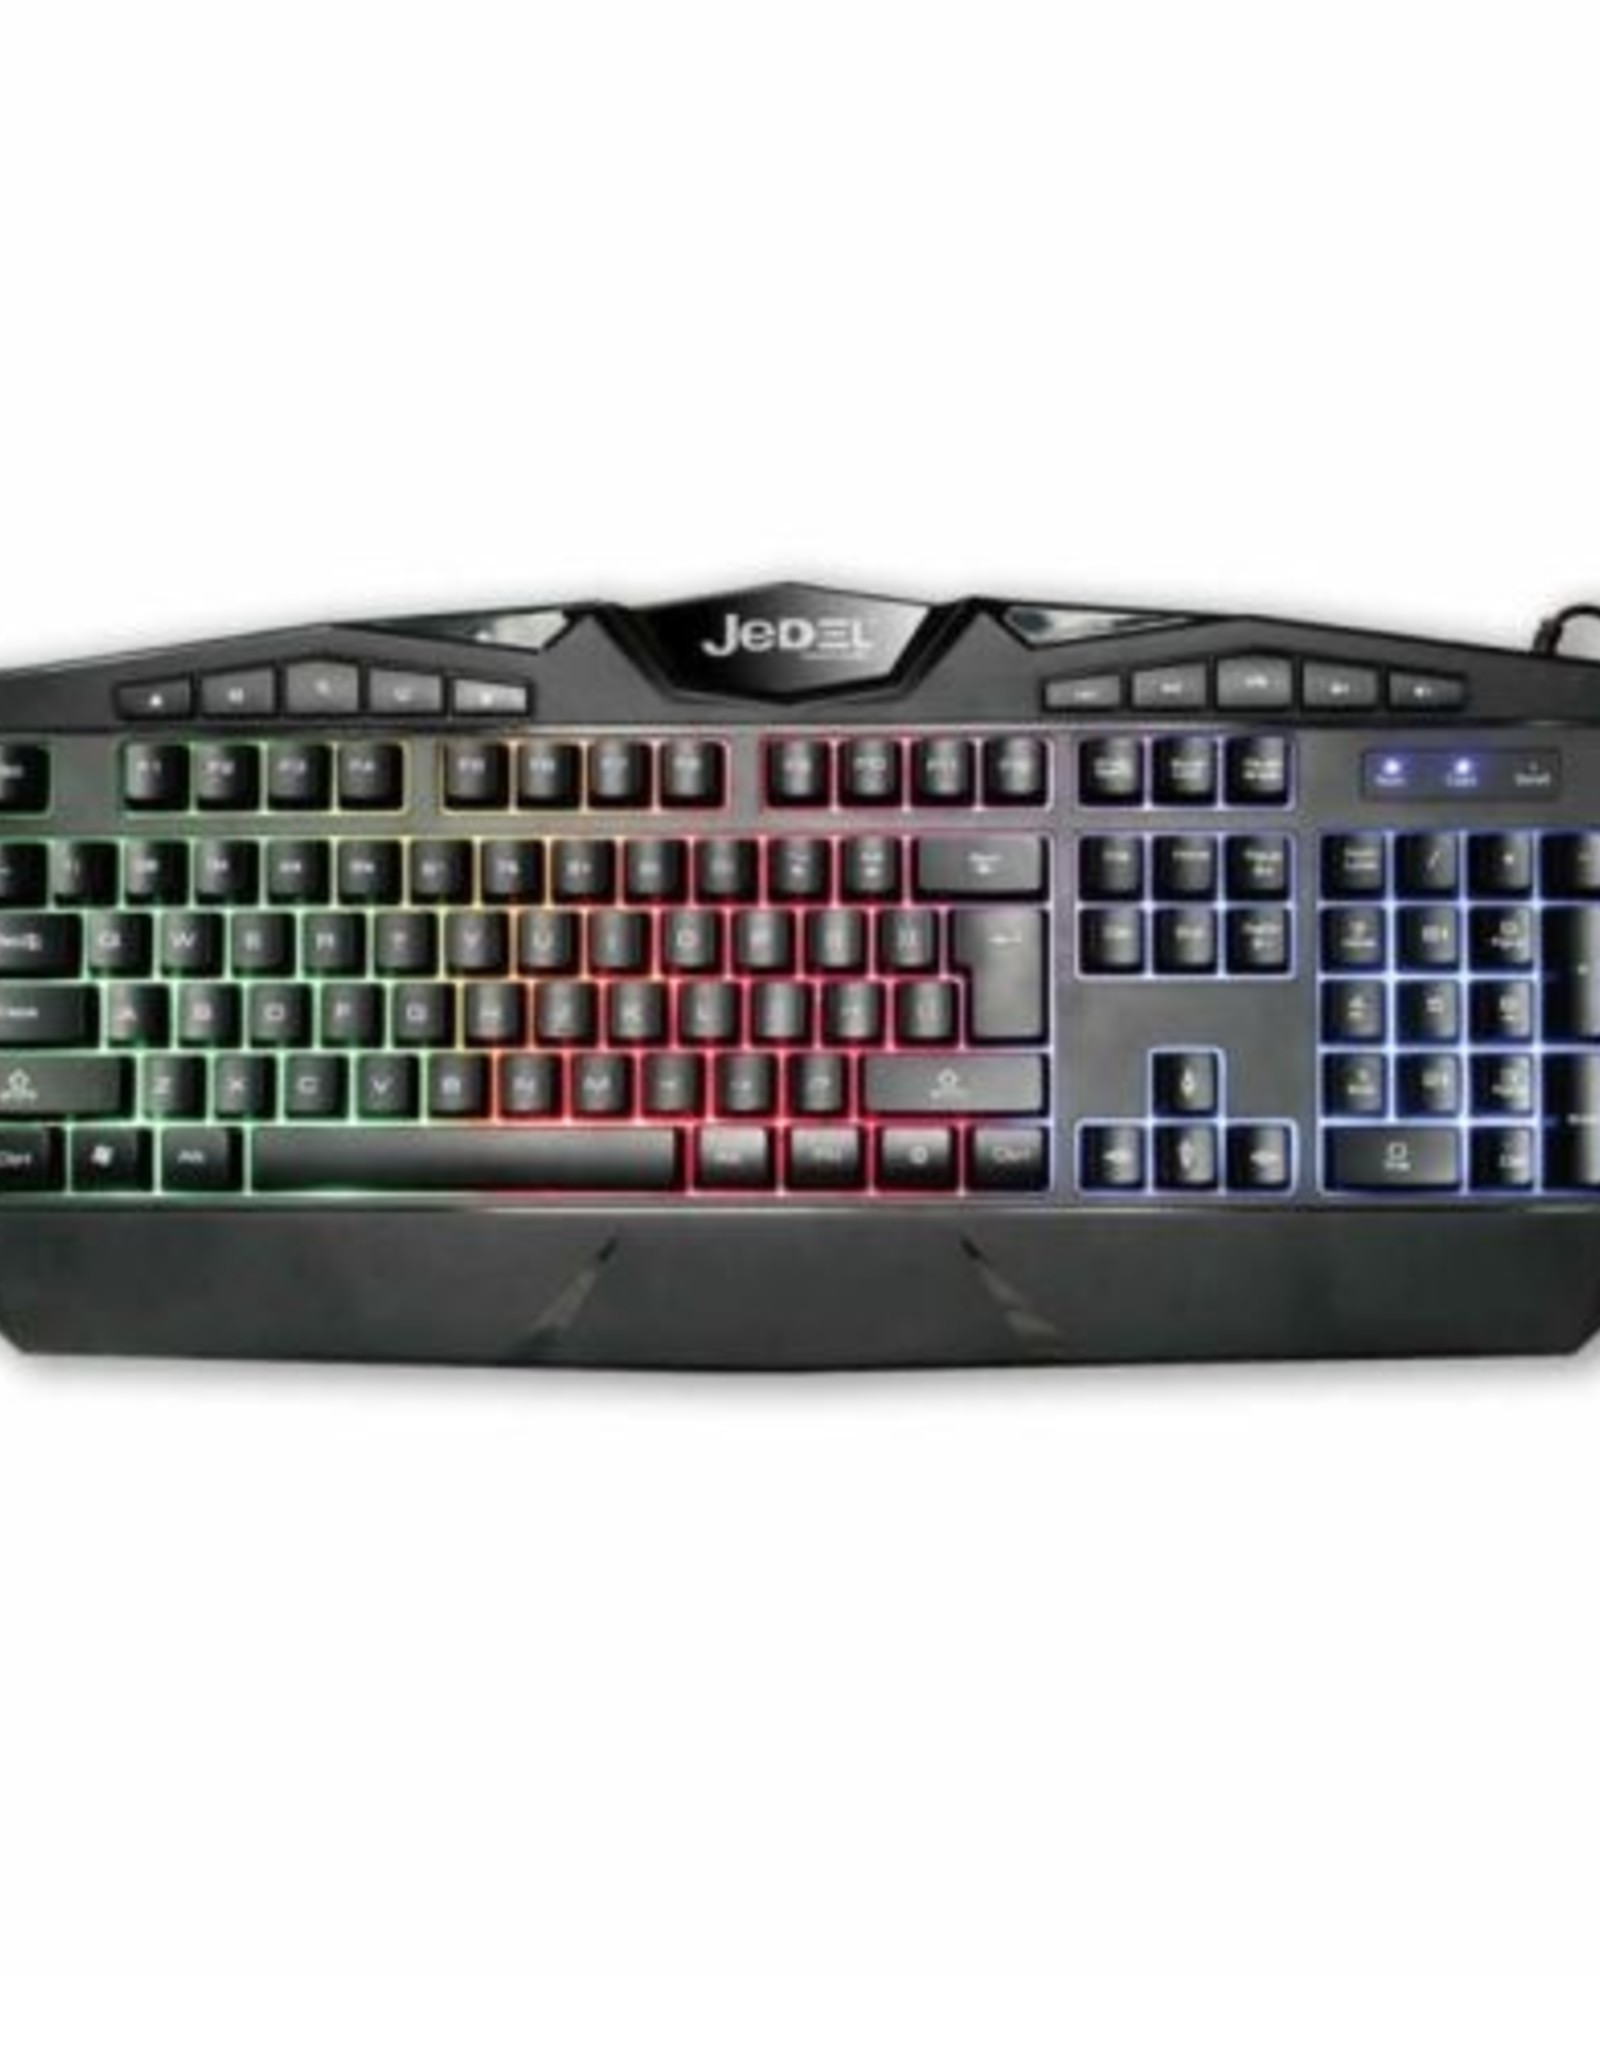 JEDEL JEDEL CP-01 GUARDIAN 4 IN 1 RGB GAMING KIT, KEYBOARD, MOUSE, HEADSET & MOUSE MAT